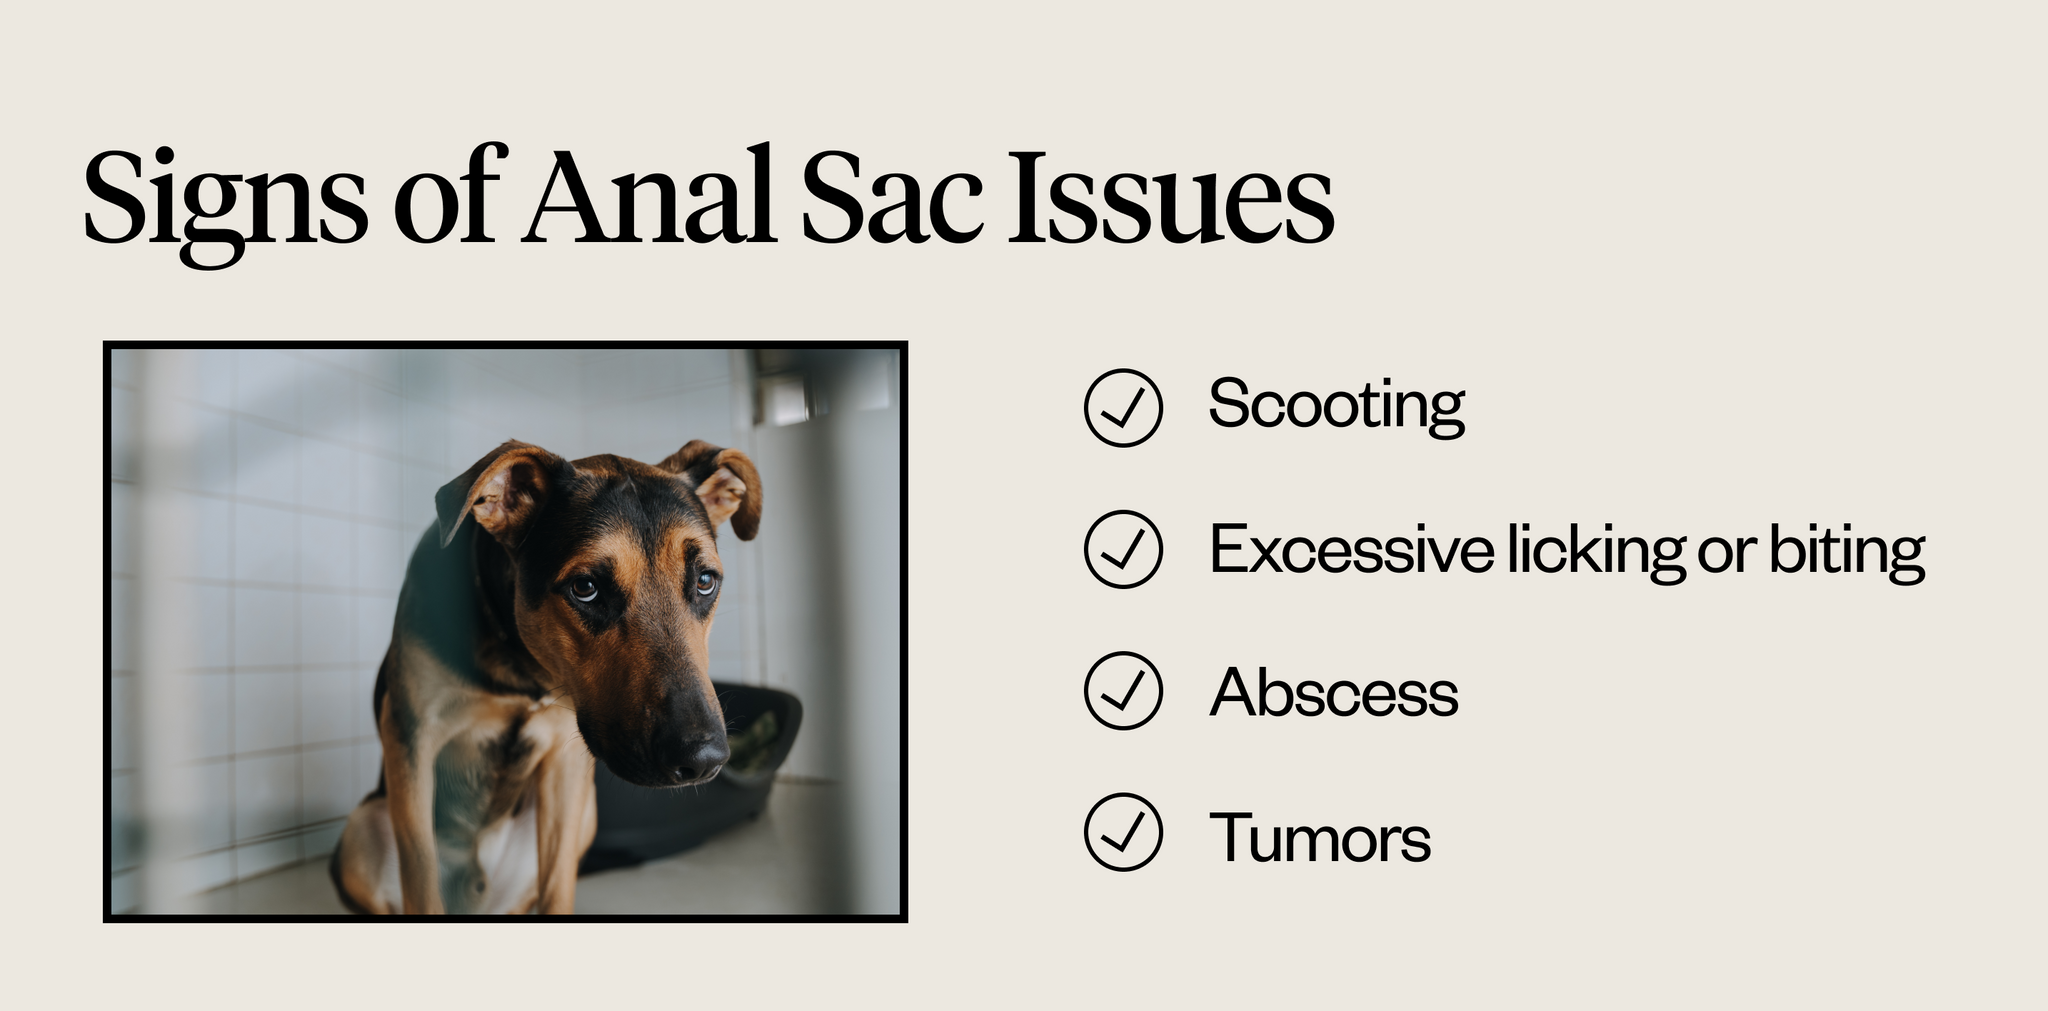 Signs of anal sac issues in dogs